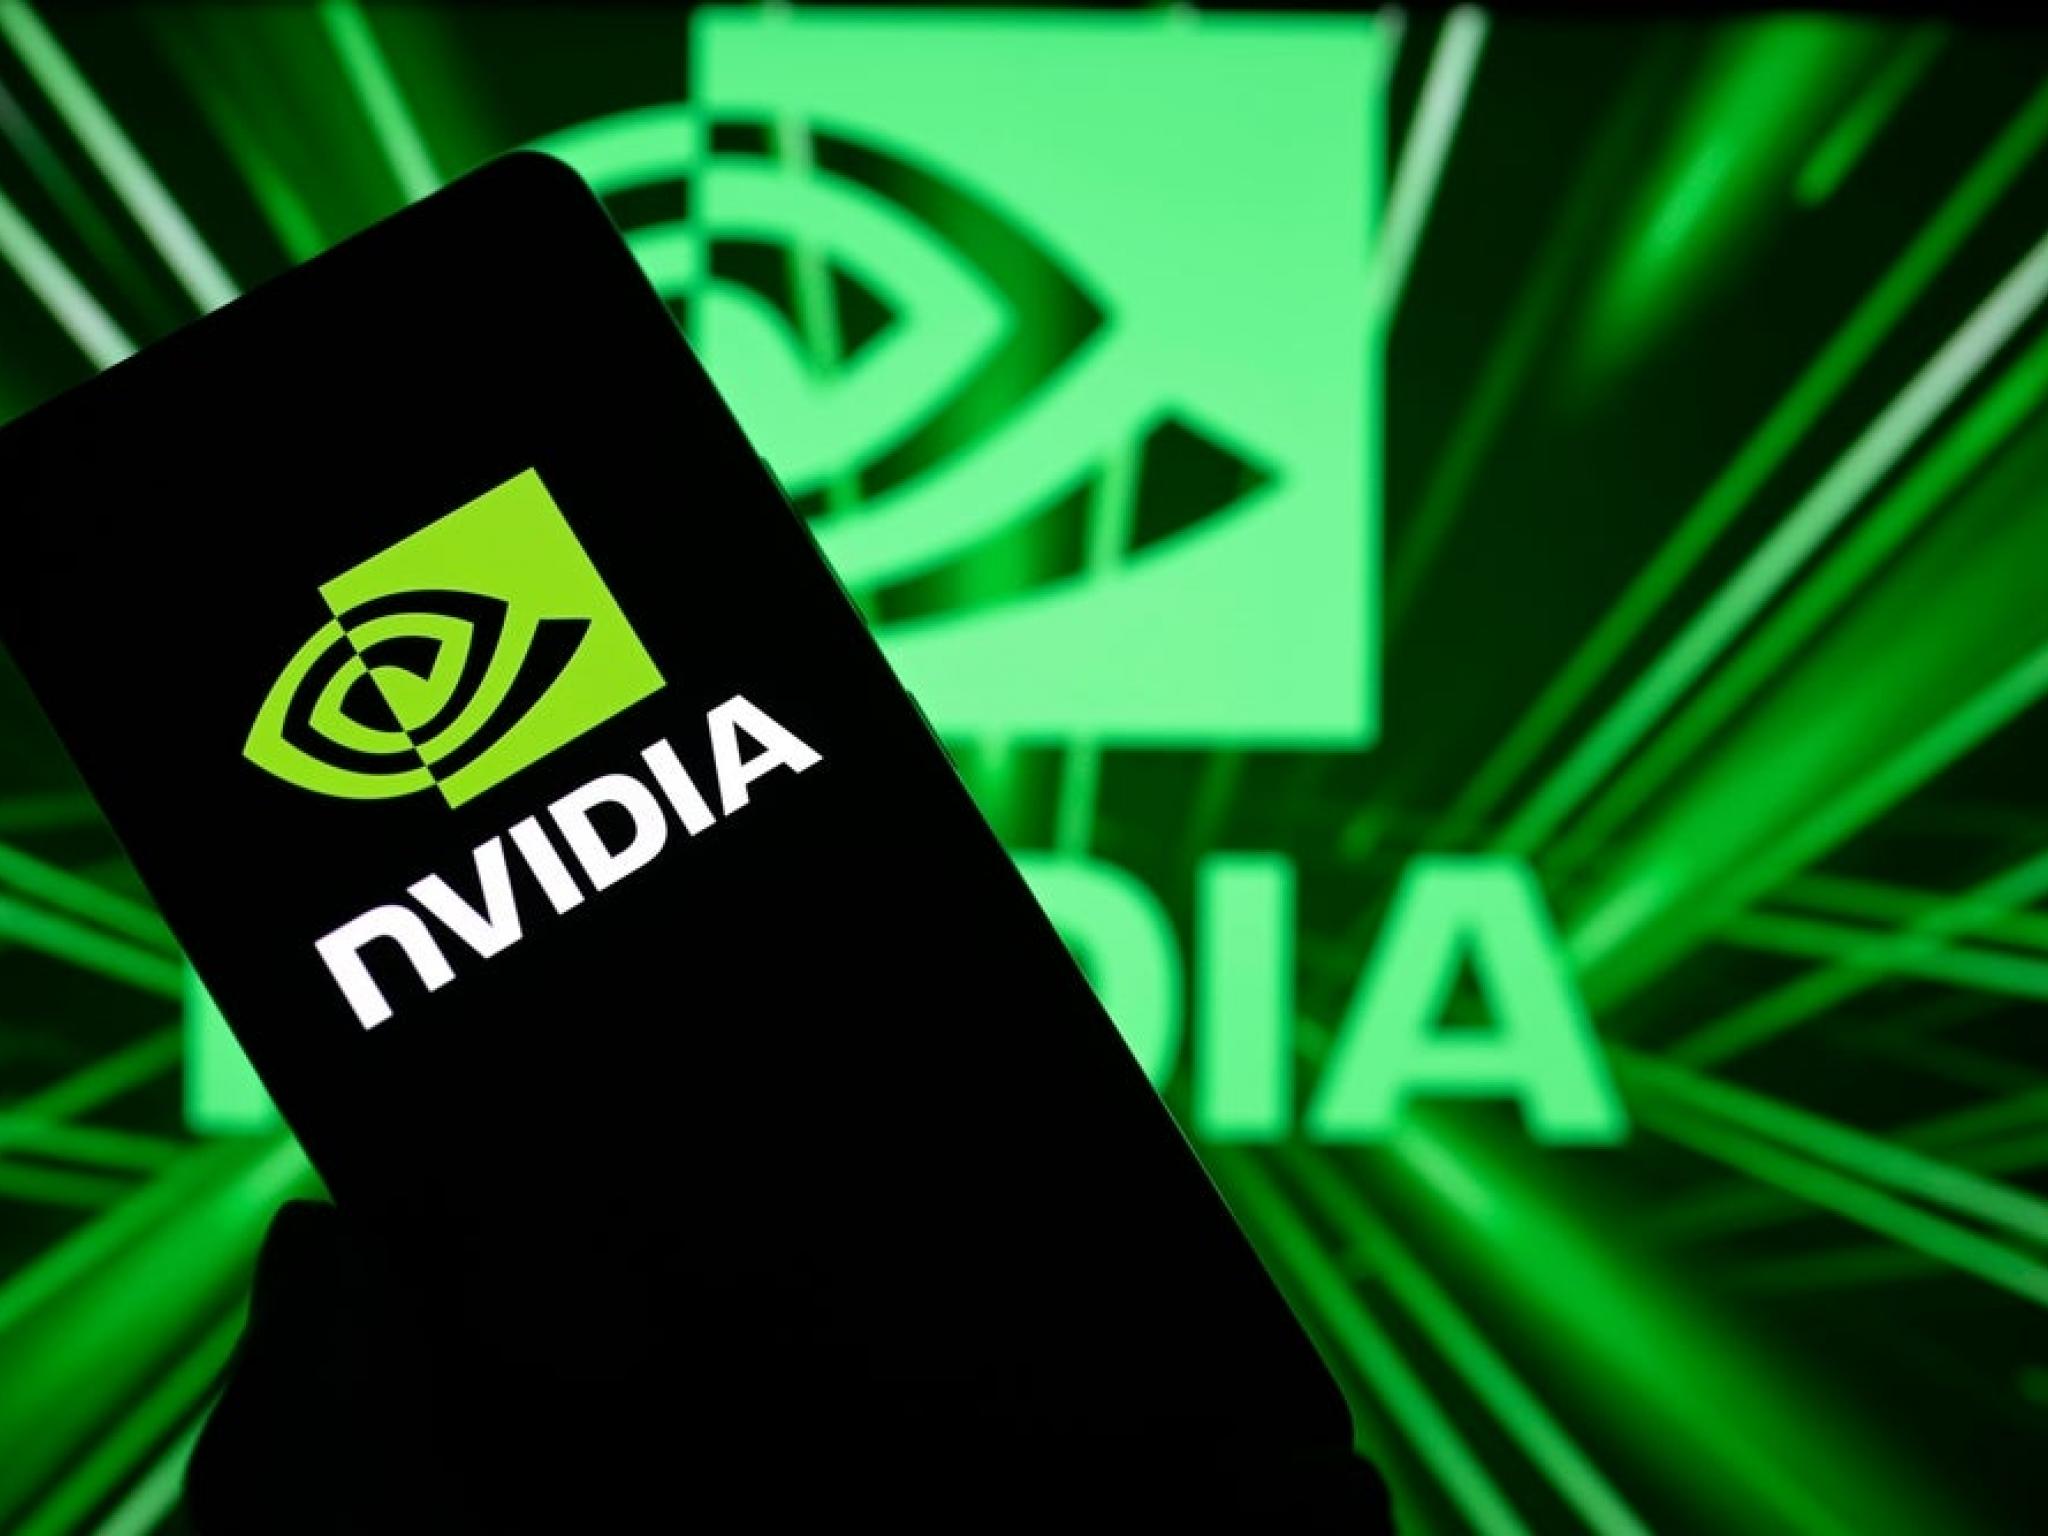  nvidias-top-customer-may-be-microsoft-accounting-for-a-fifth-of-its-revenue-report 